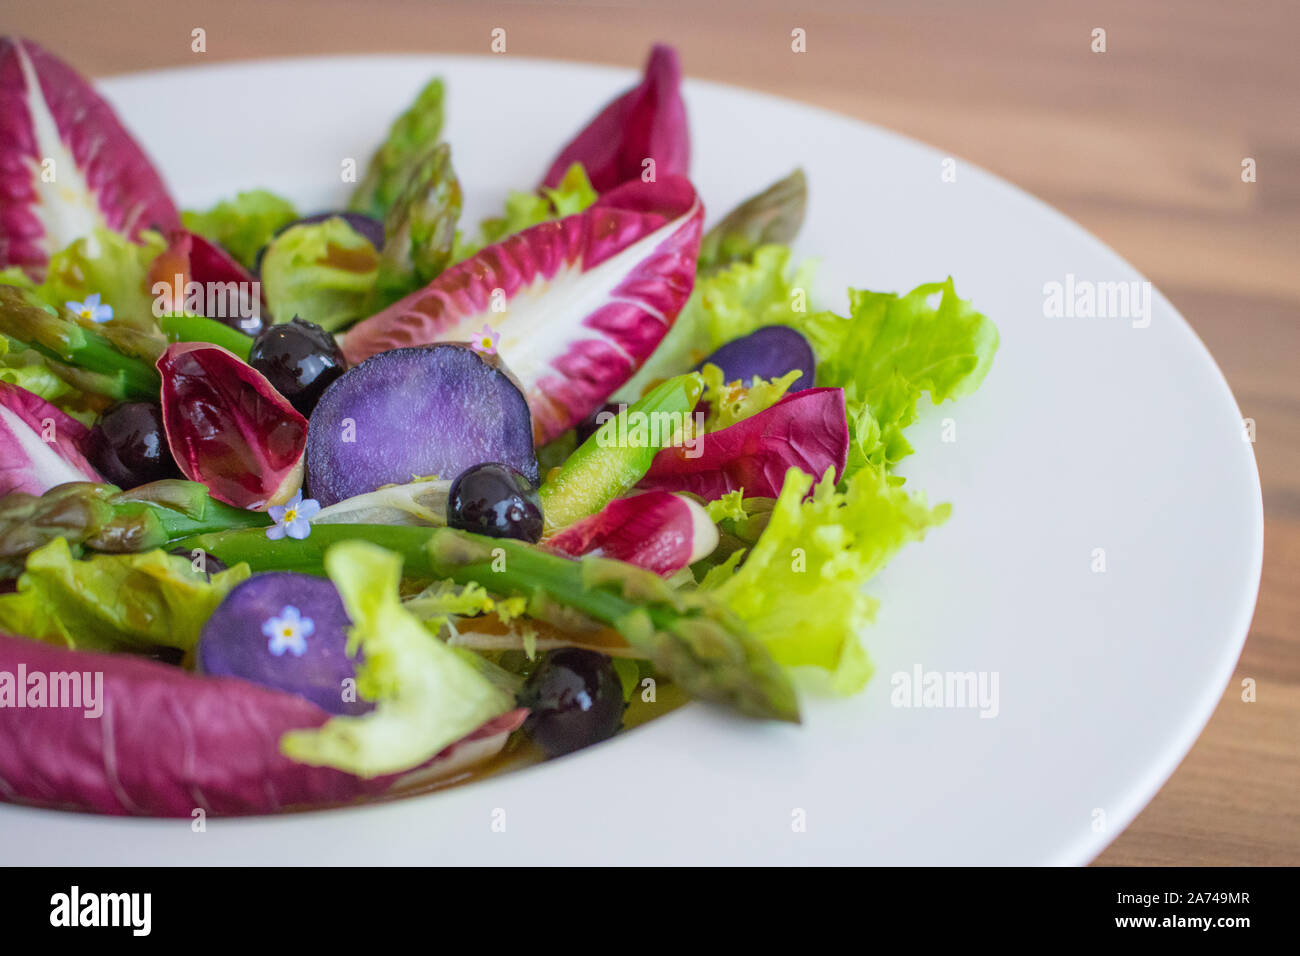 Food photography of a colorful salad with blue potatoes Stock Photo